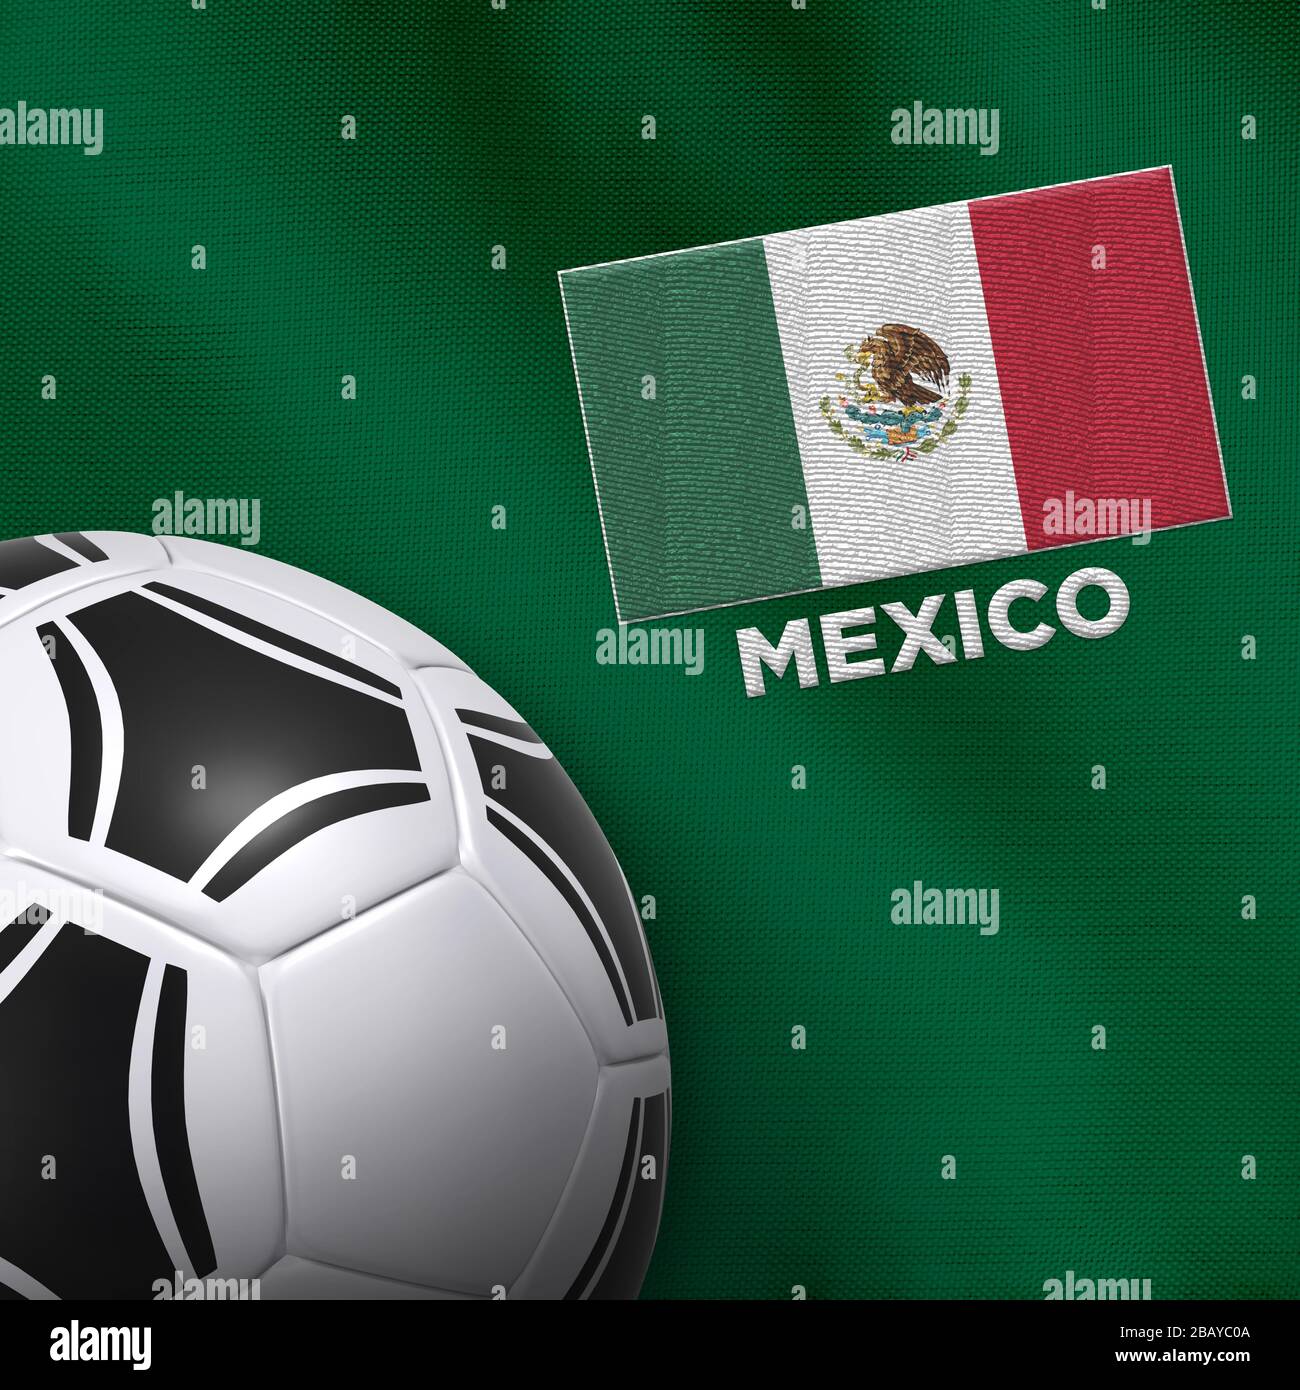 Football (soccer) ball and national team jersey of Mexico. Stock Photo